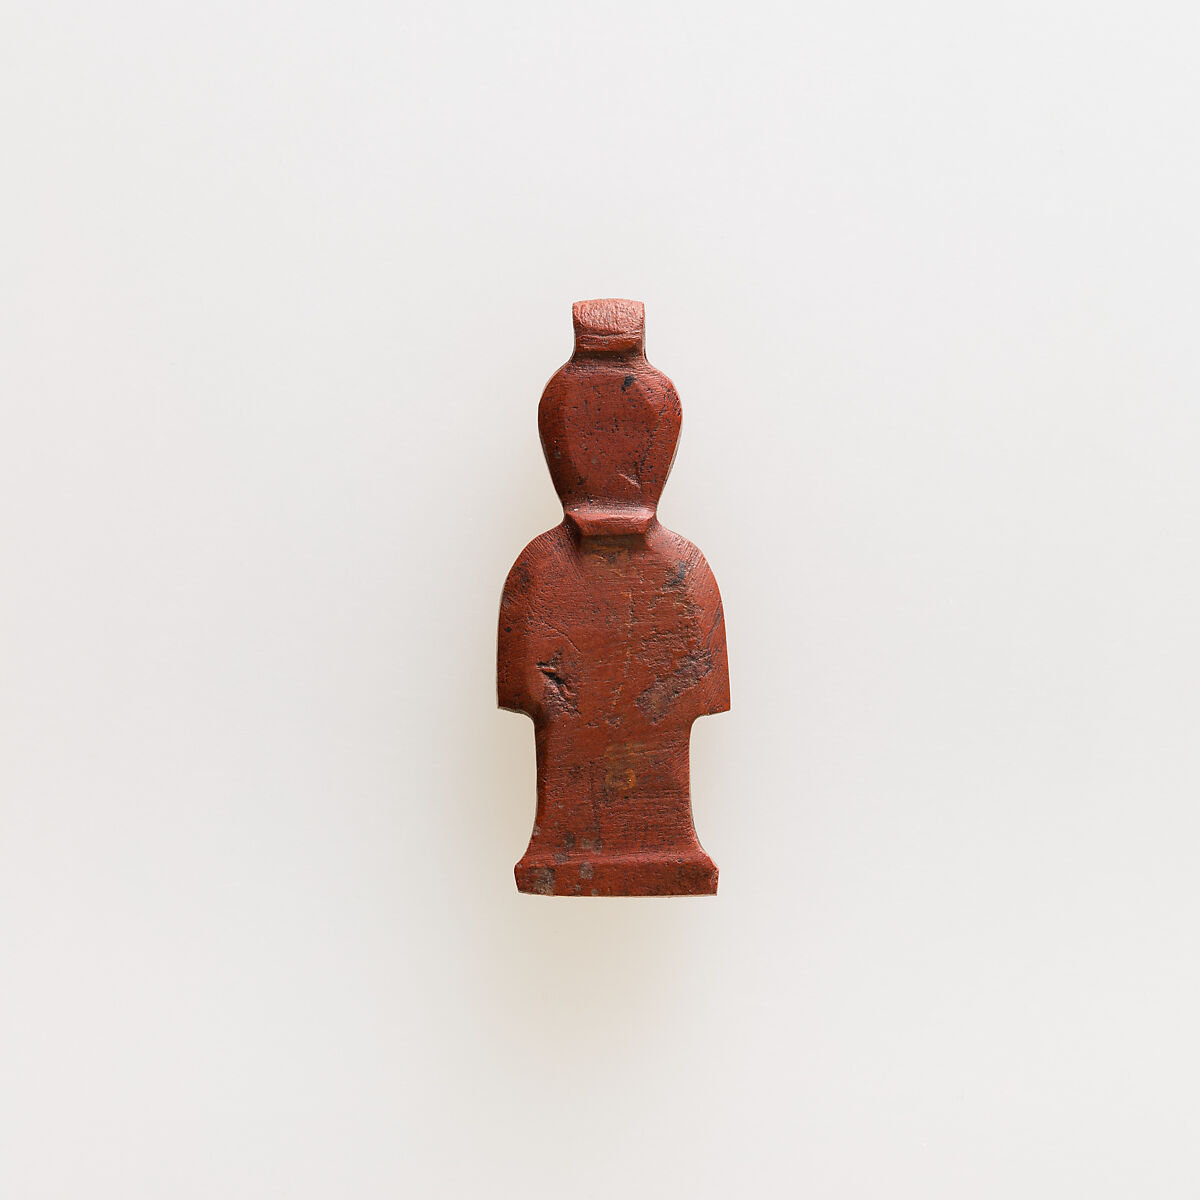 Tit (Isis knot) amulet, Red Glass 